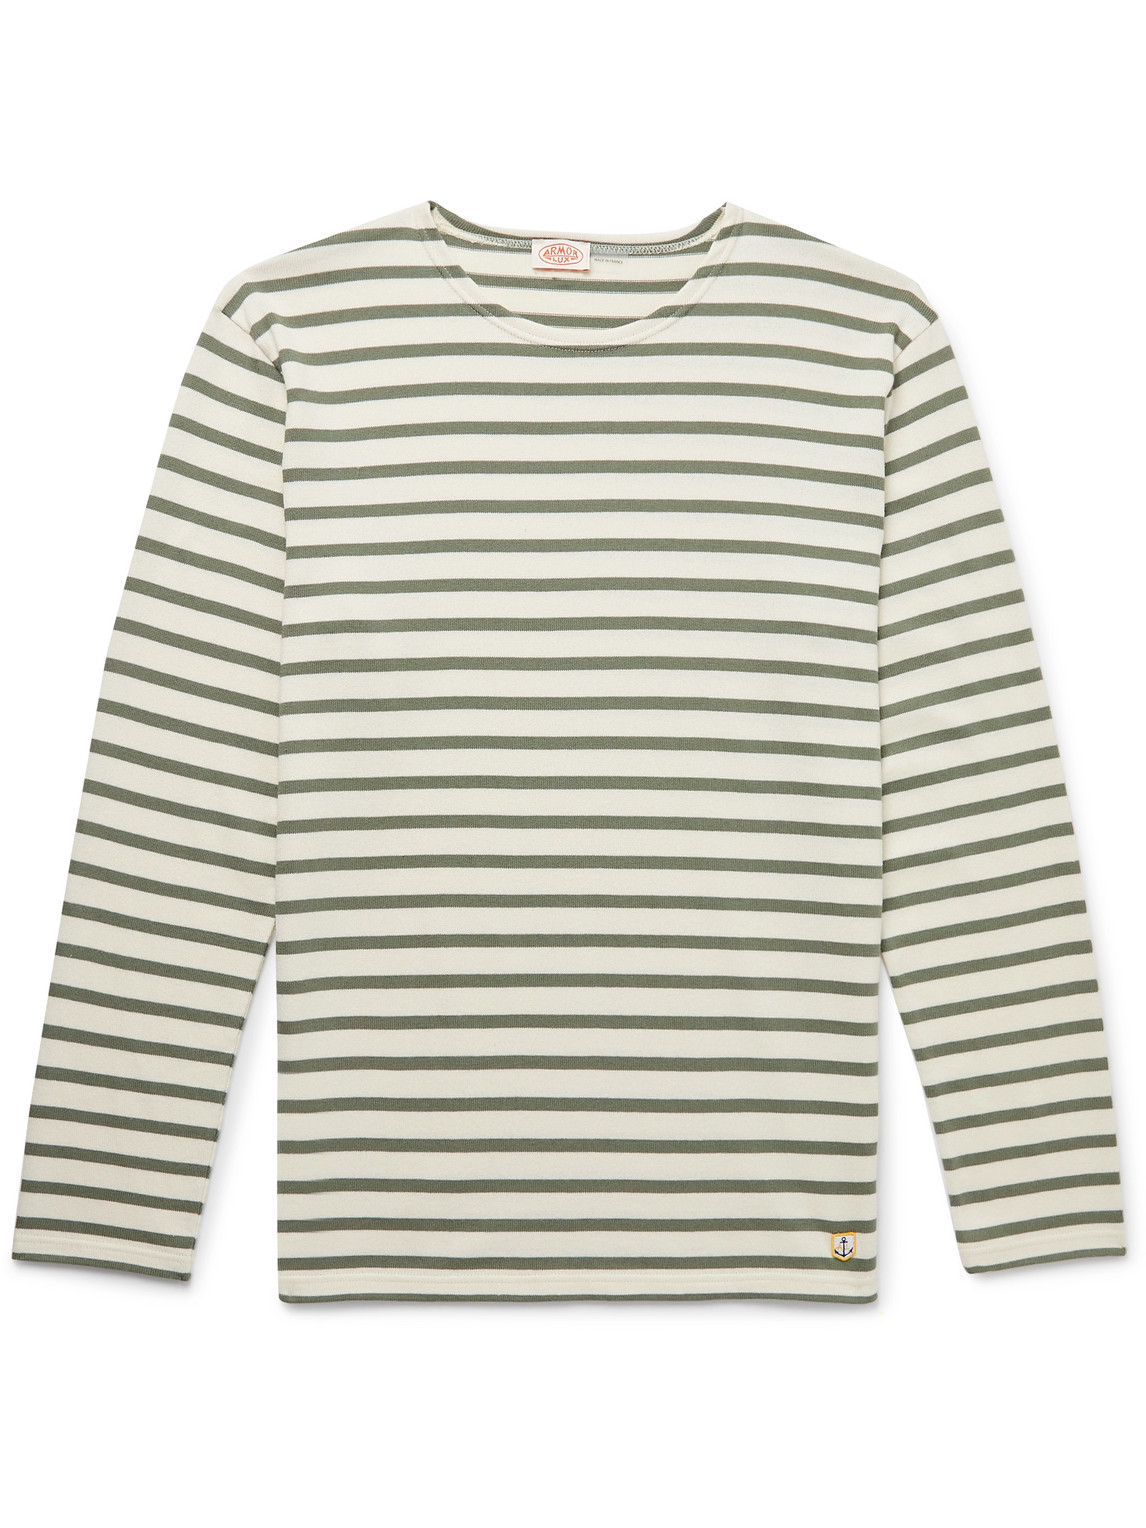 Armor-lux Striped Cotton-jersey T-shirt In Green